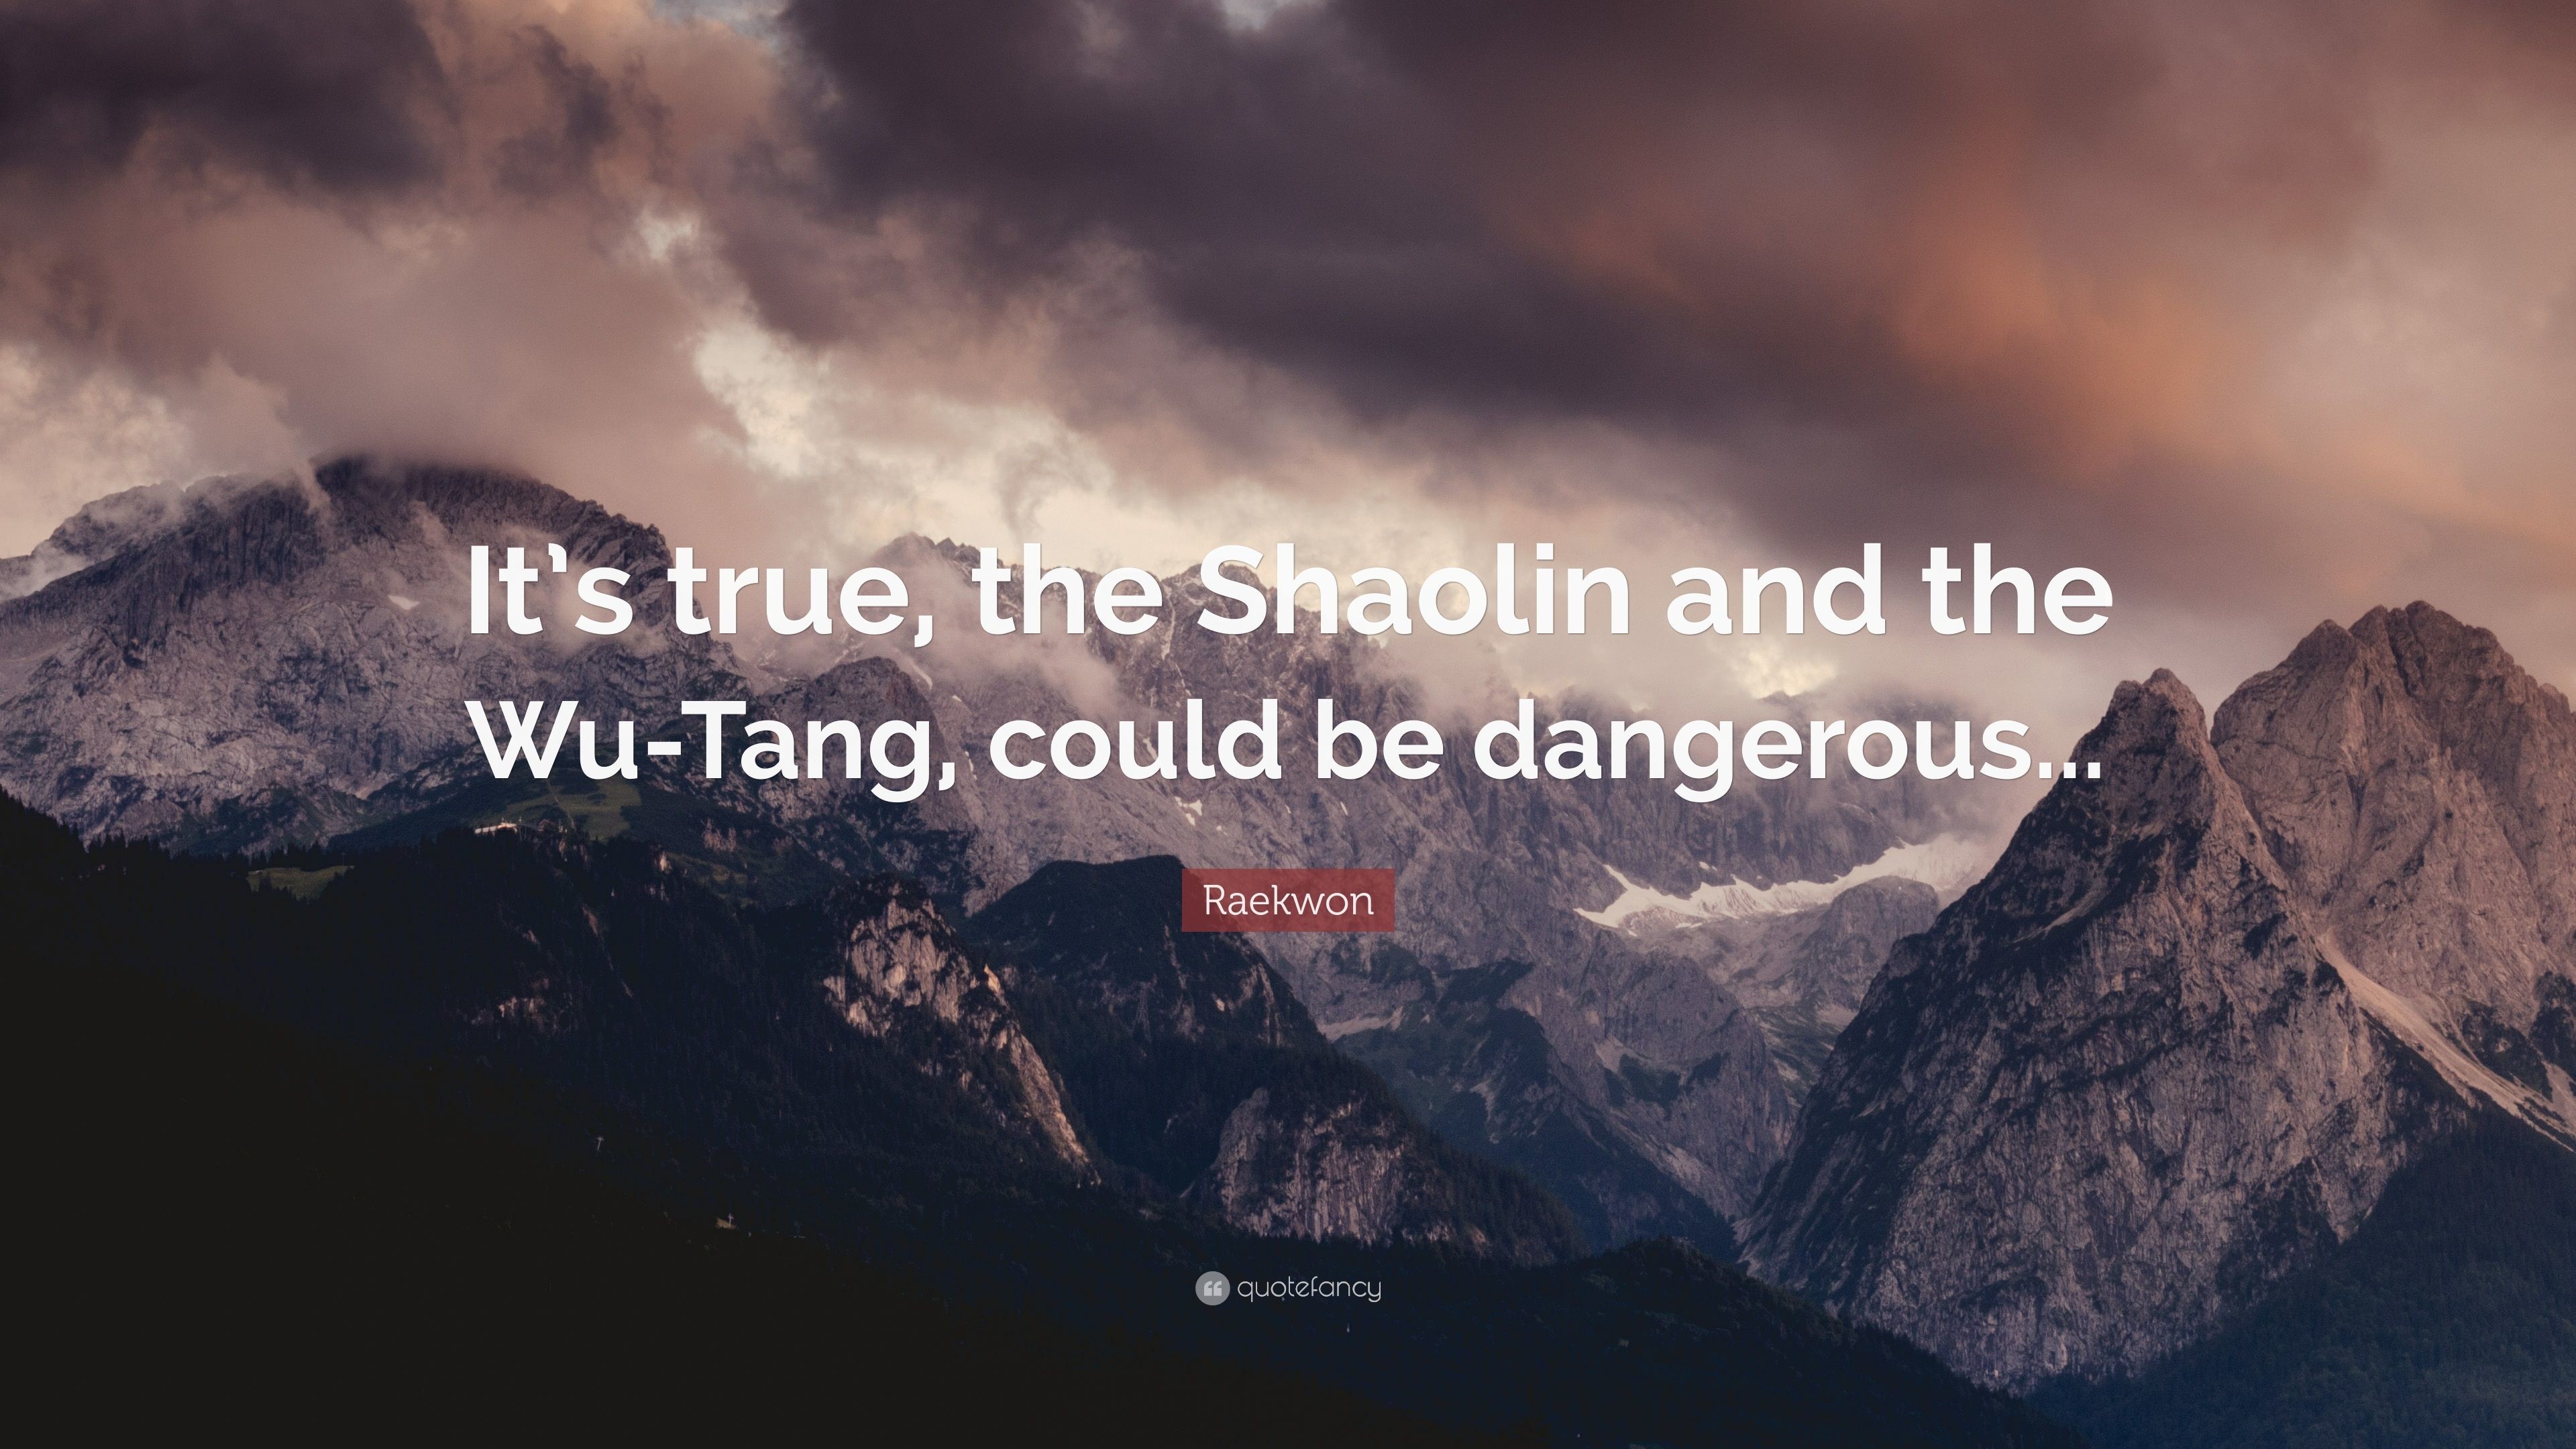 3840x2160 Raekwon Quote: “It's true, the Shaolin and the Wu-Tang, could